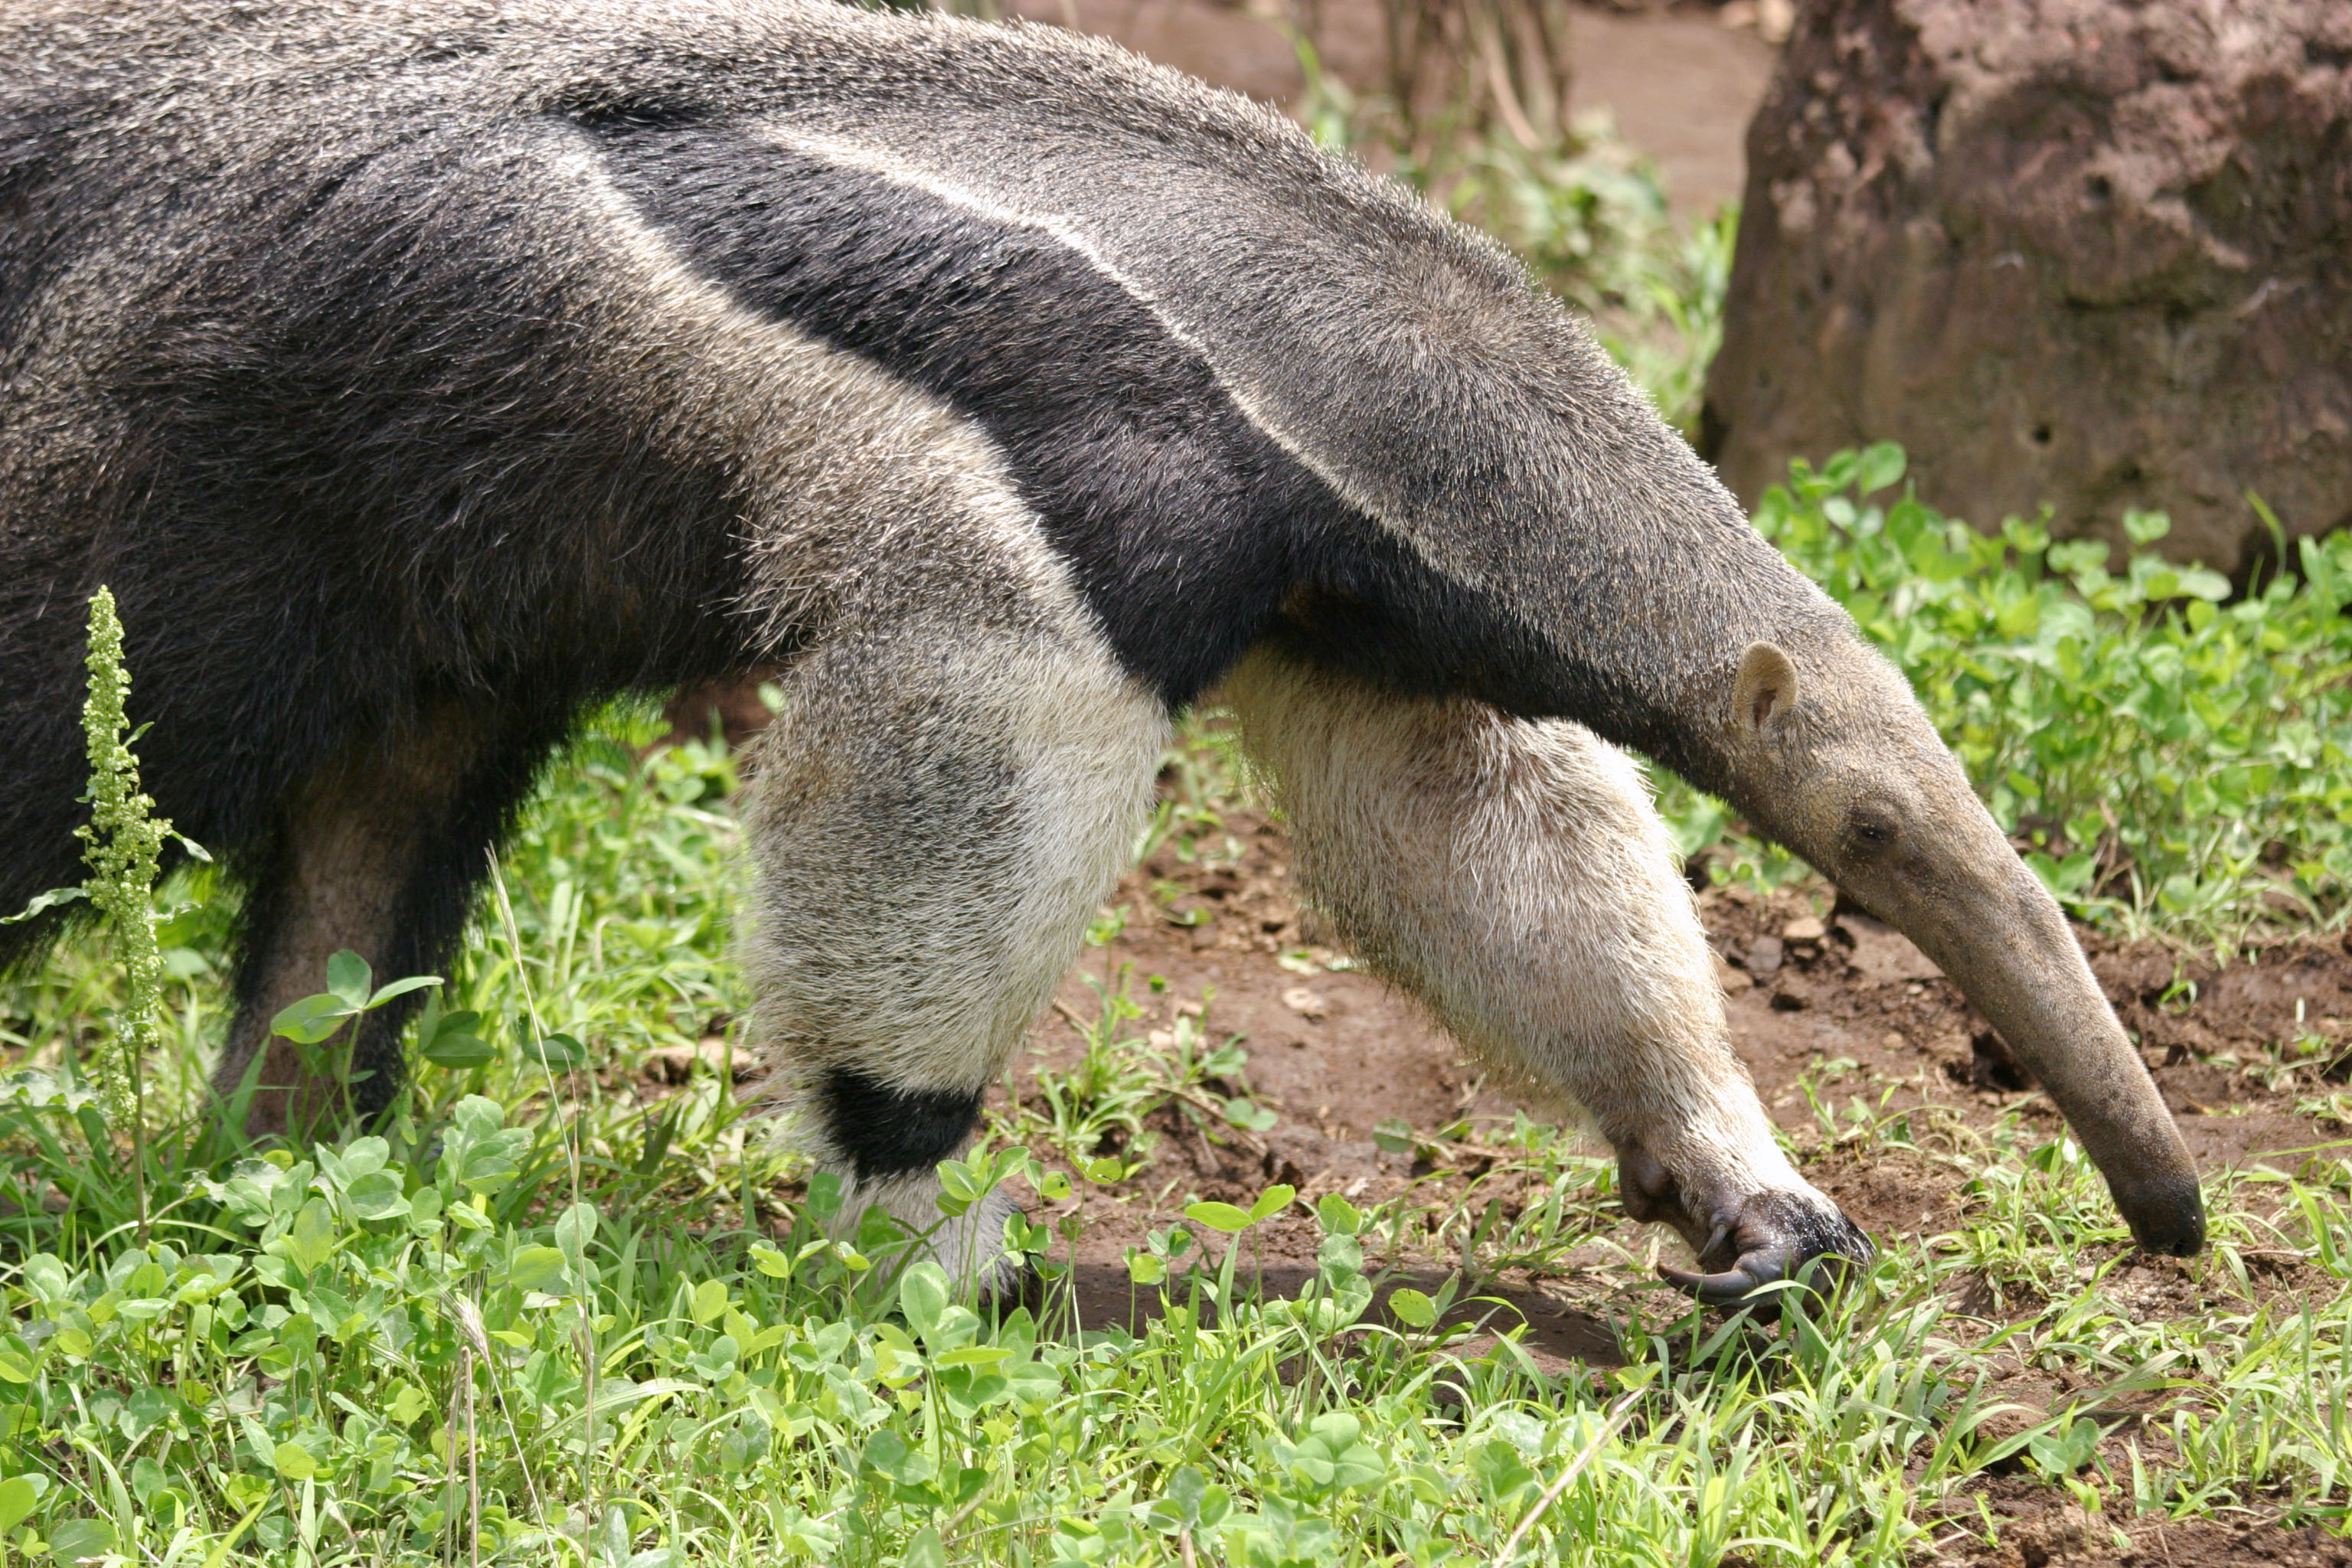 Anteater HD Wallpaper Background